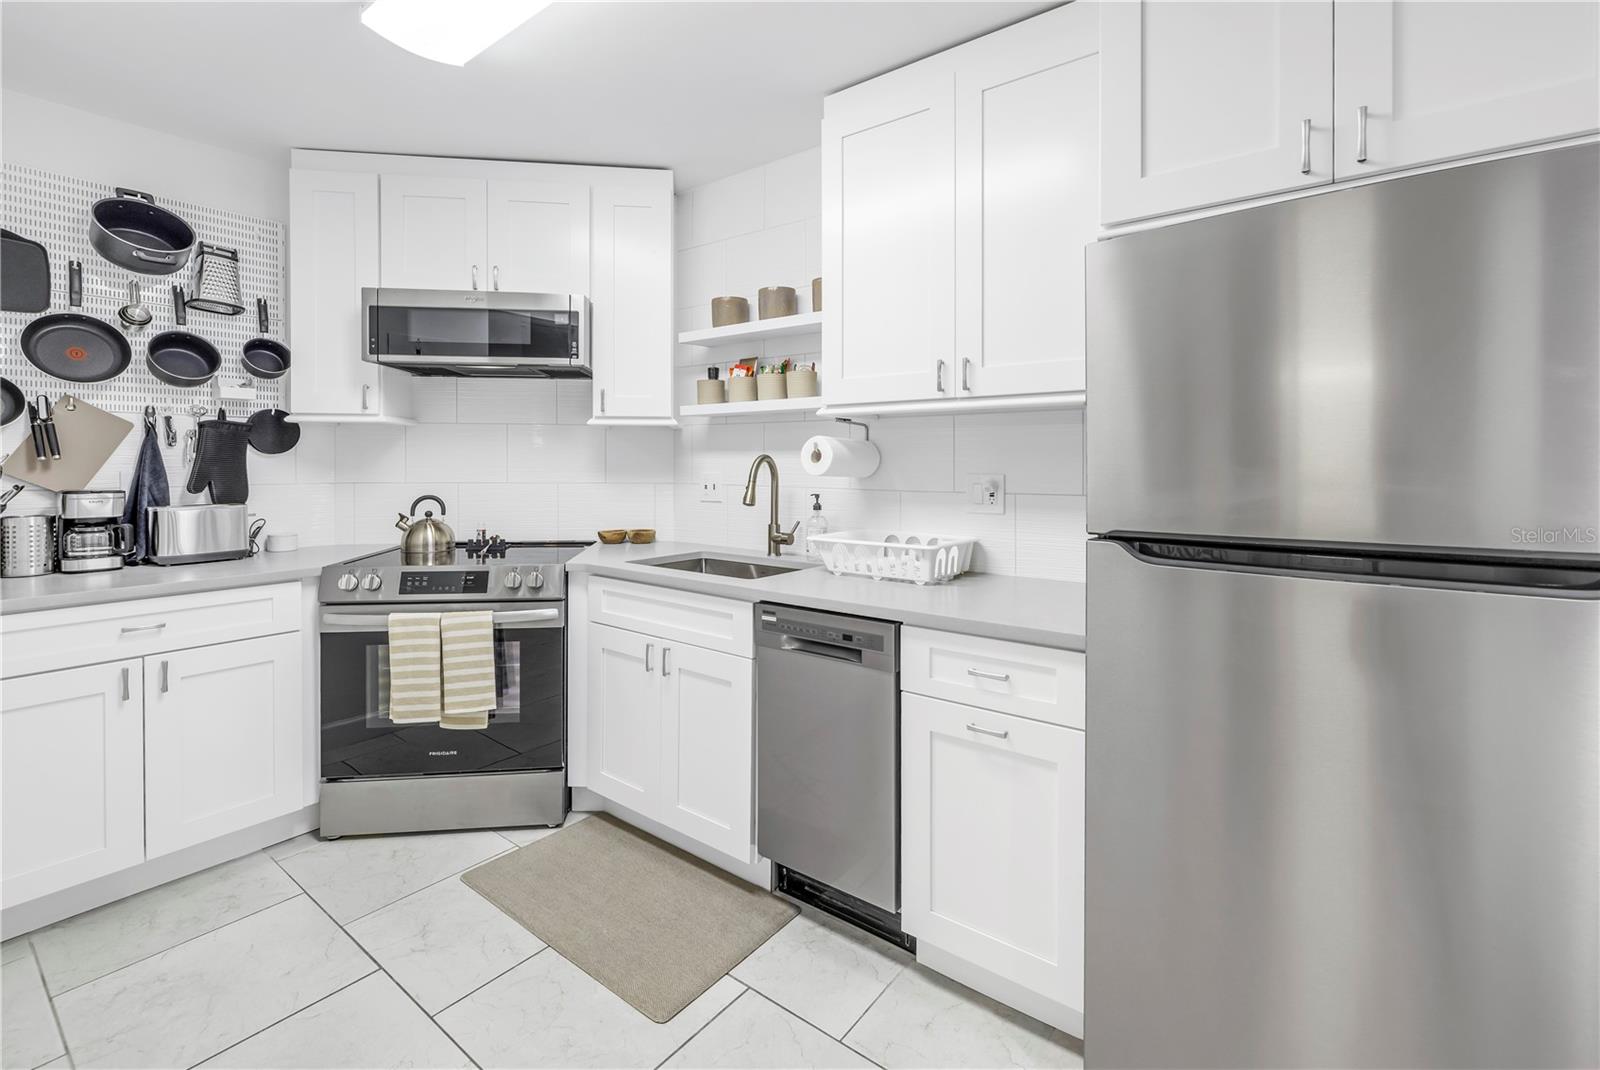 Remodeled Kitchen with Stainless Steel Appliances